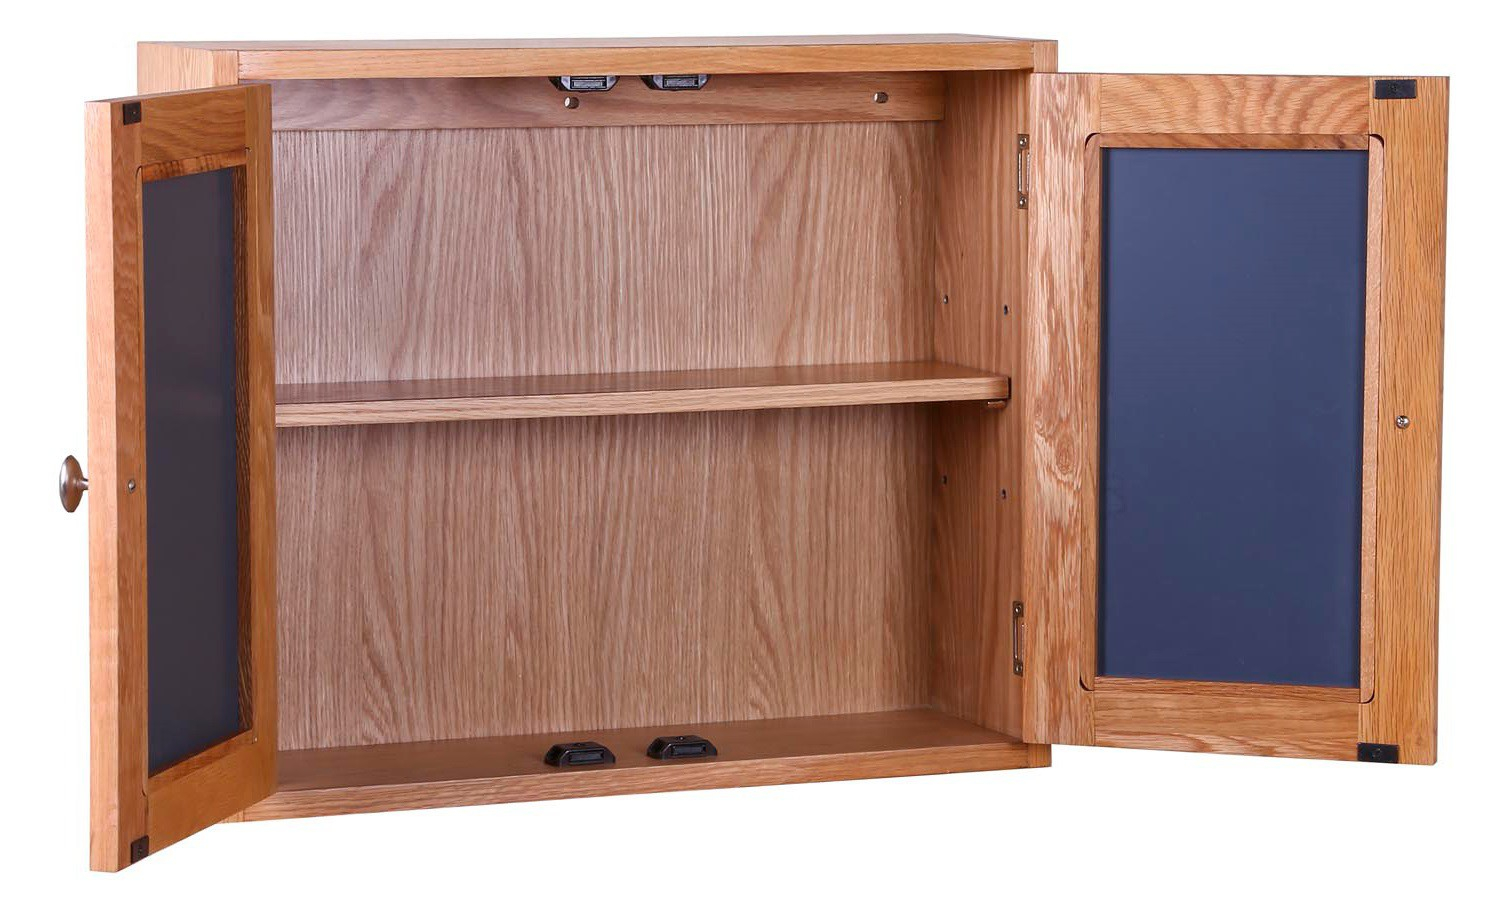 Light Oak Bathroom Storage Cabinet With Mirrors Hallowood throughout proportions 1500 X 898